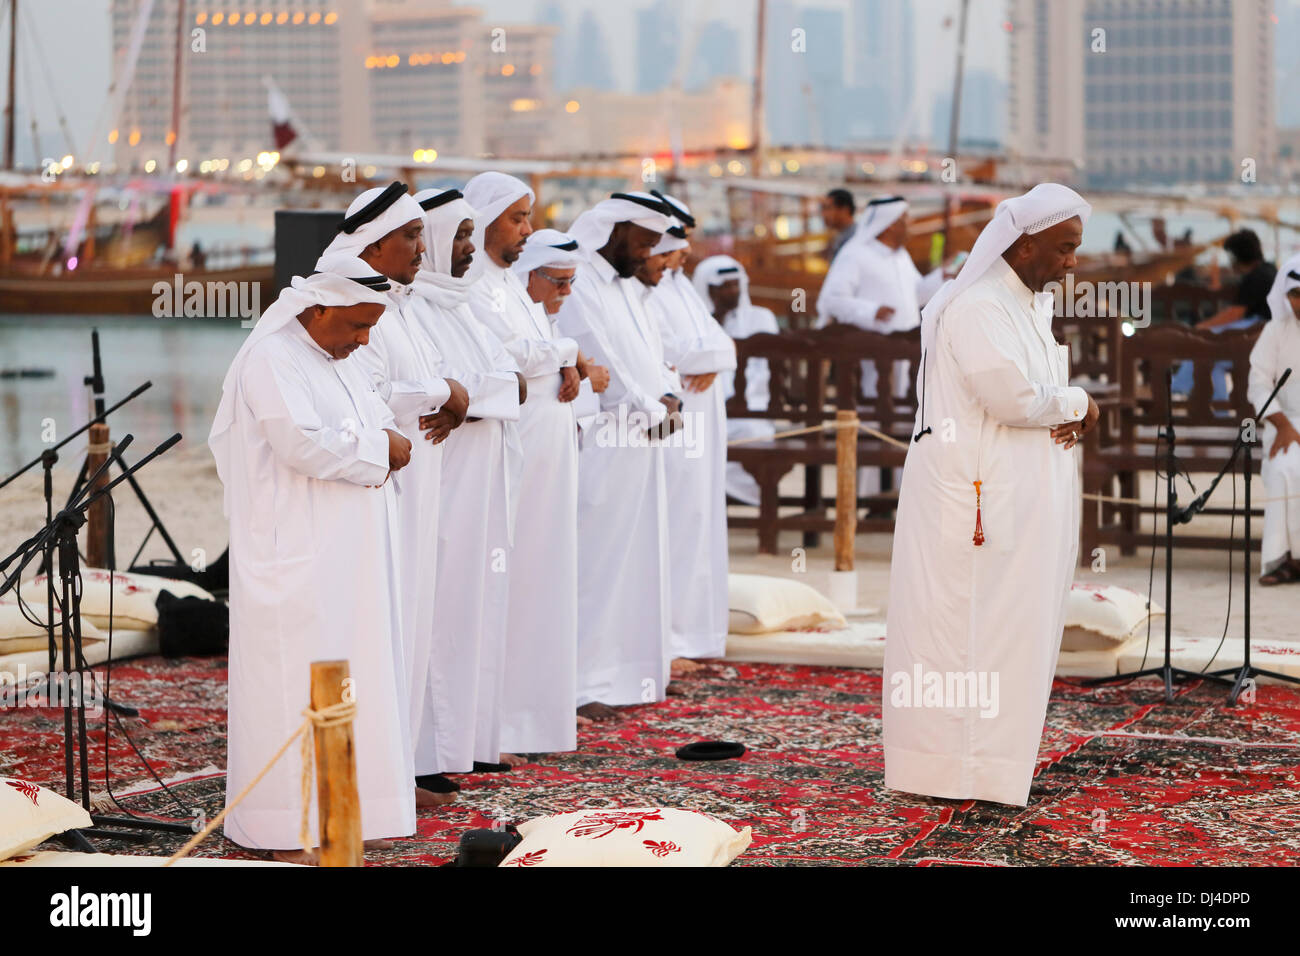 DOHA, Qatar - Nov 21 2013: Members of a Qatari traditional music group perform evening prayers at the 3rd Traditional Dhow Festival, held at Katara cultural village in the West Bay area of the Qatari capital. Some of the dhows and the city skyline are behind them. Credit:  Art of Travel/Alamy Live News Stock Photo